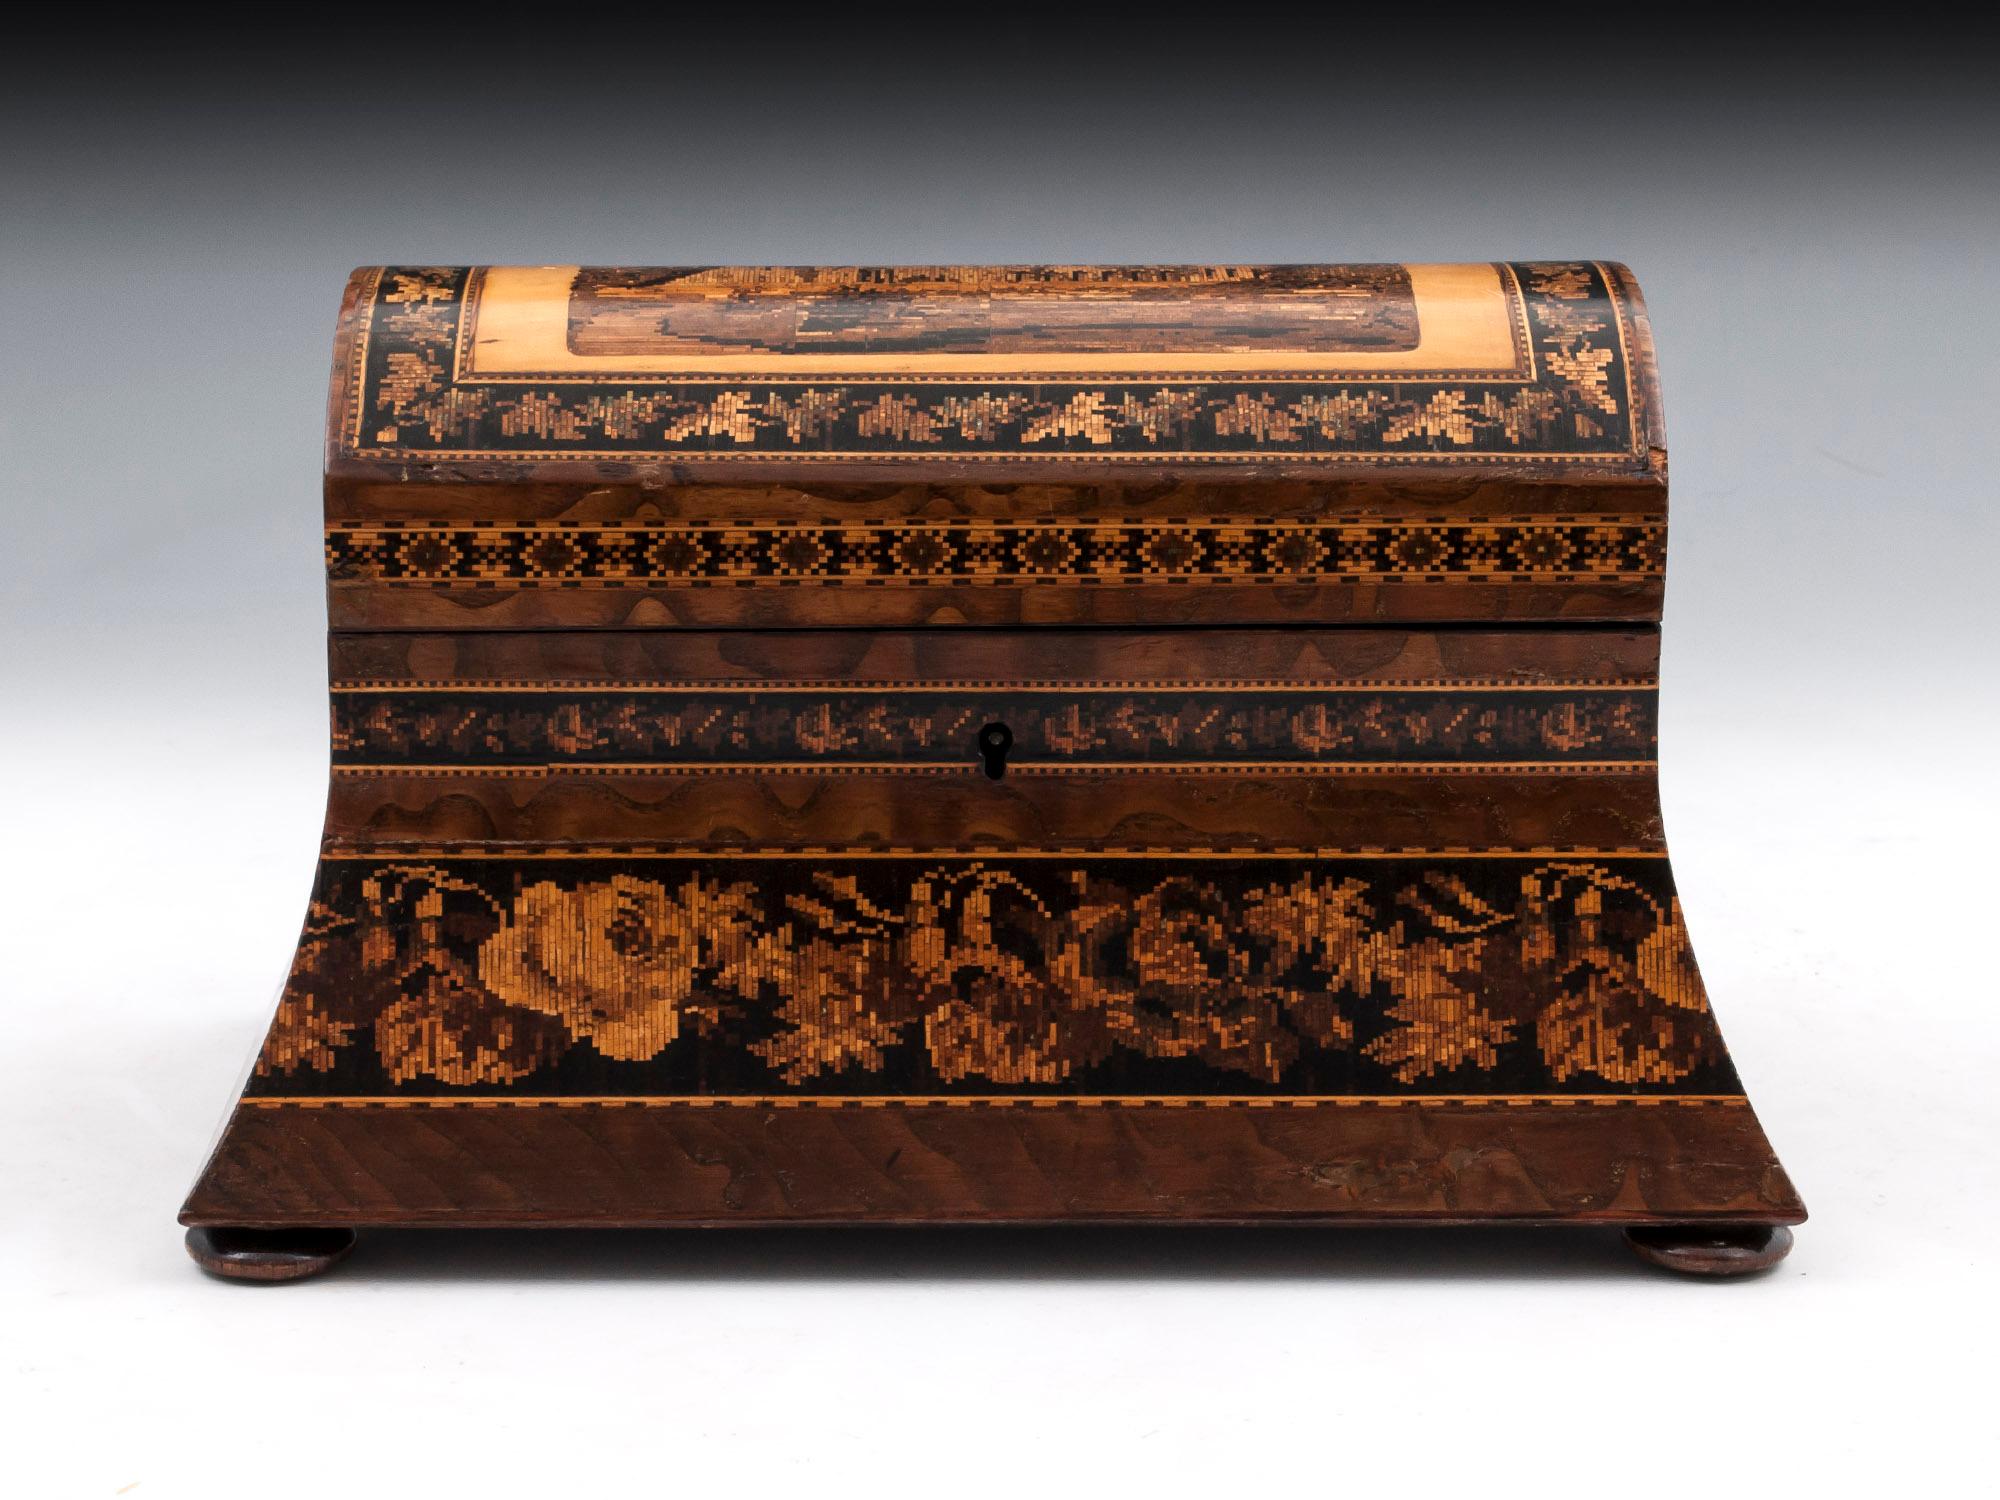 Tunbridge ware dome top tea caddy veneered in Hungarian ash with a view of Tonbridge Castle on the top, standing on four turned wooden feet. 

The Tunbridge ware tea caddy interior has two lidded compartments with turned wooden